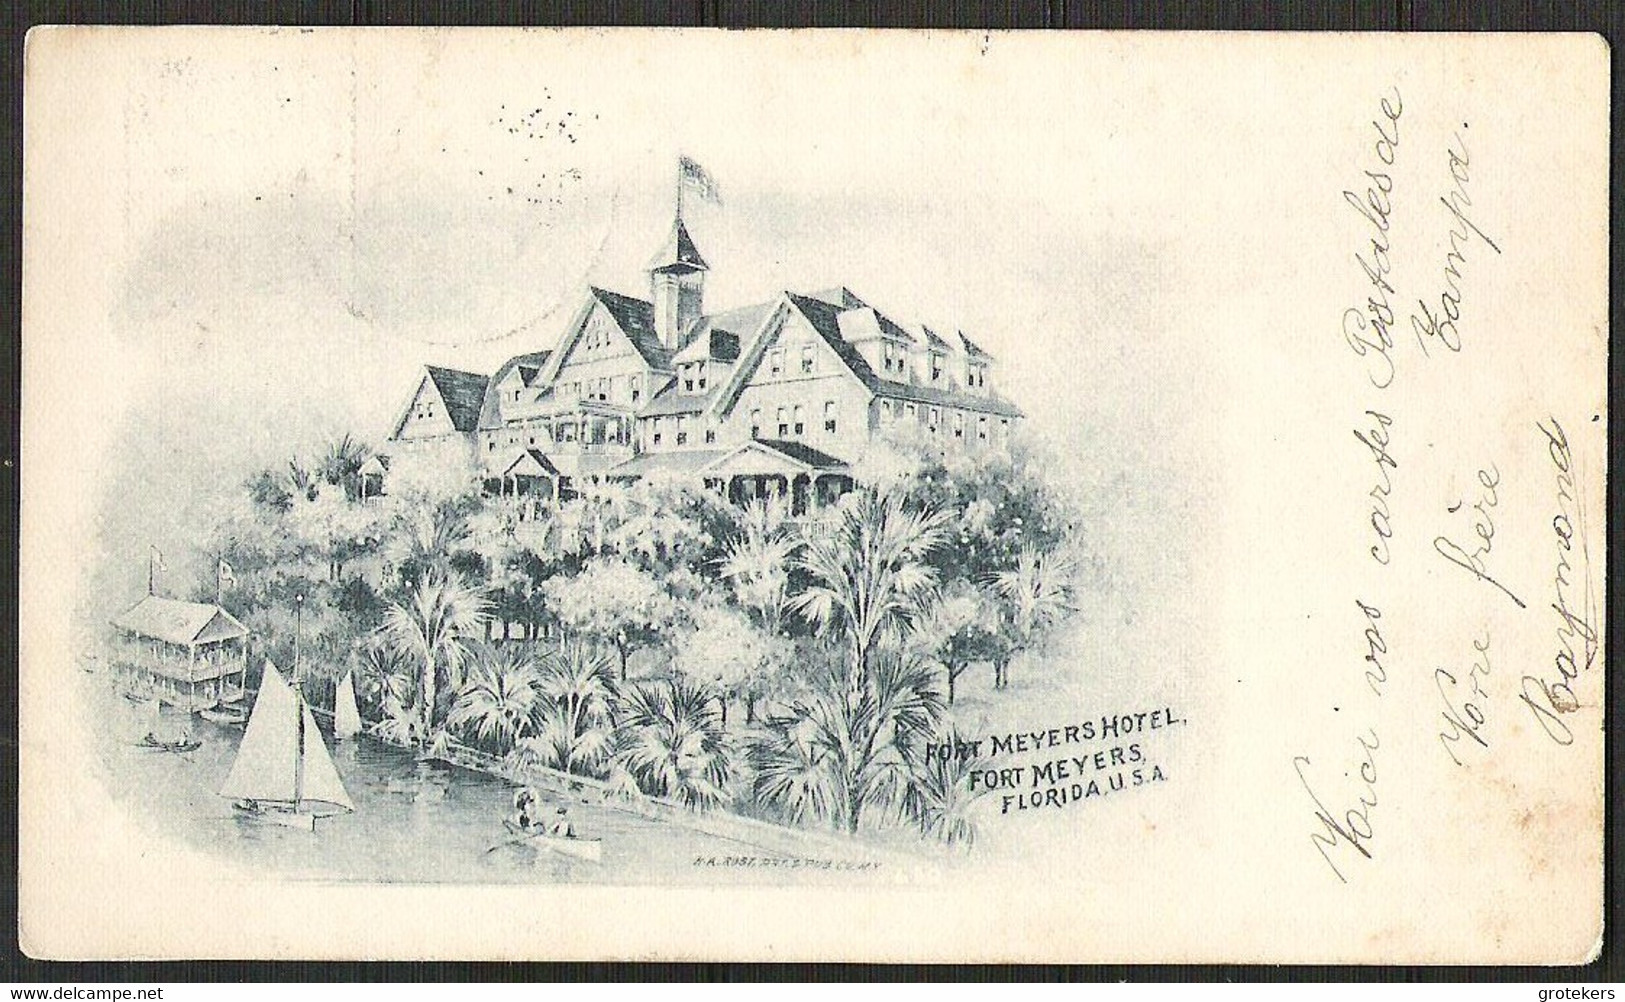 FORT MEYERS, Fort Meyers Hotel Sent 1904 From FORT TAMPA To Belgium - Fort Myers